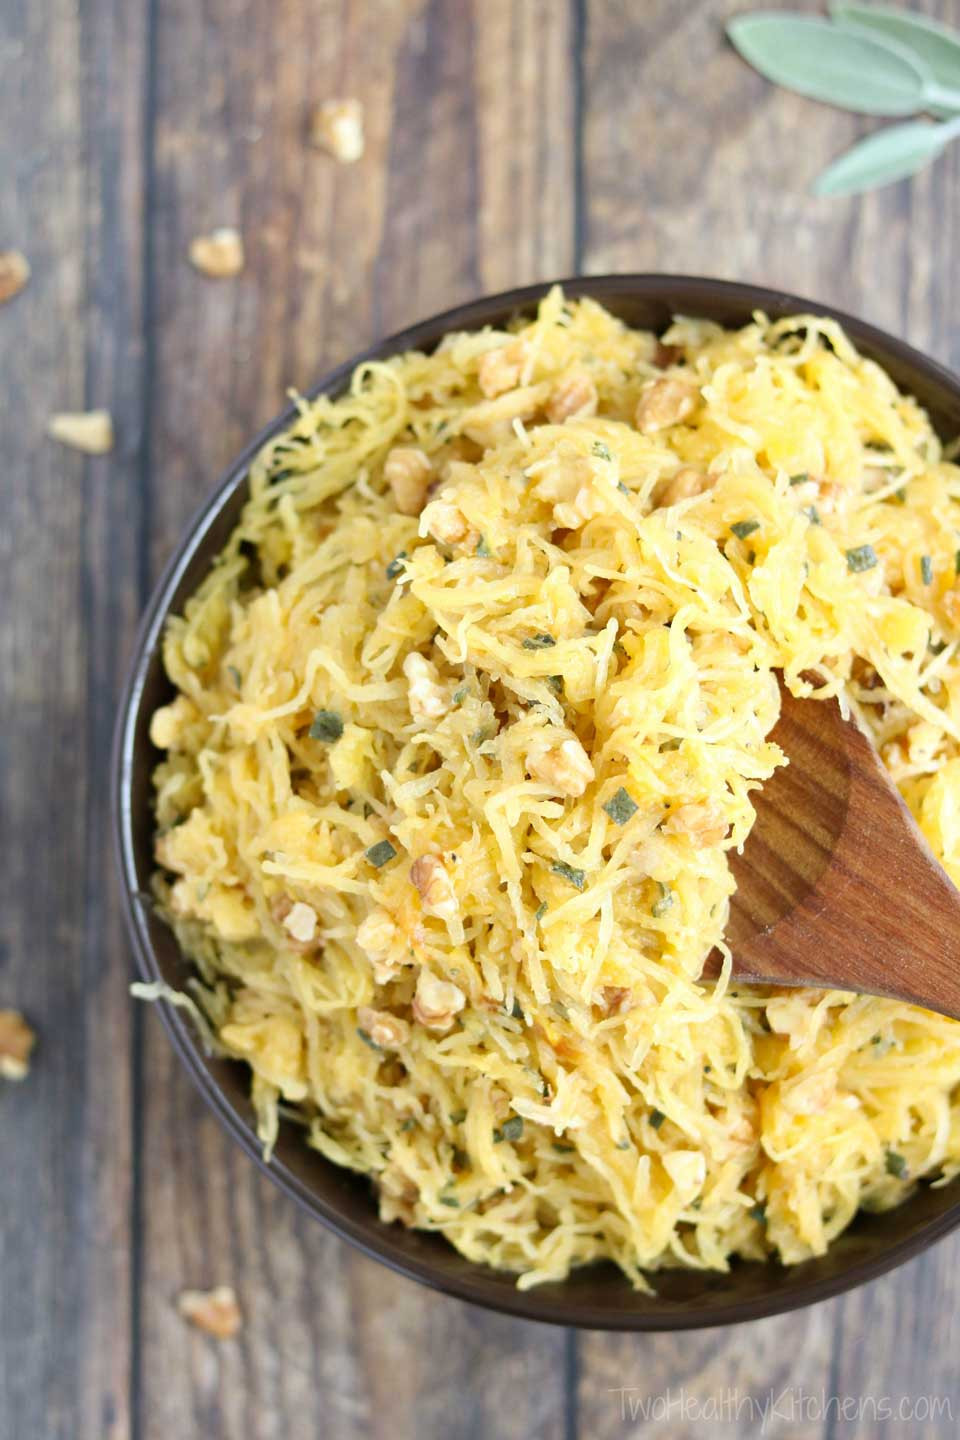 Microwave Spaghetti Squash
 Microwave Spaghetti Squash with Sage Browned Butter and